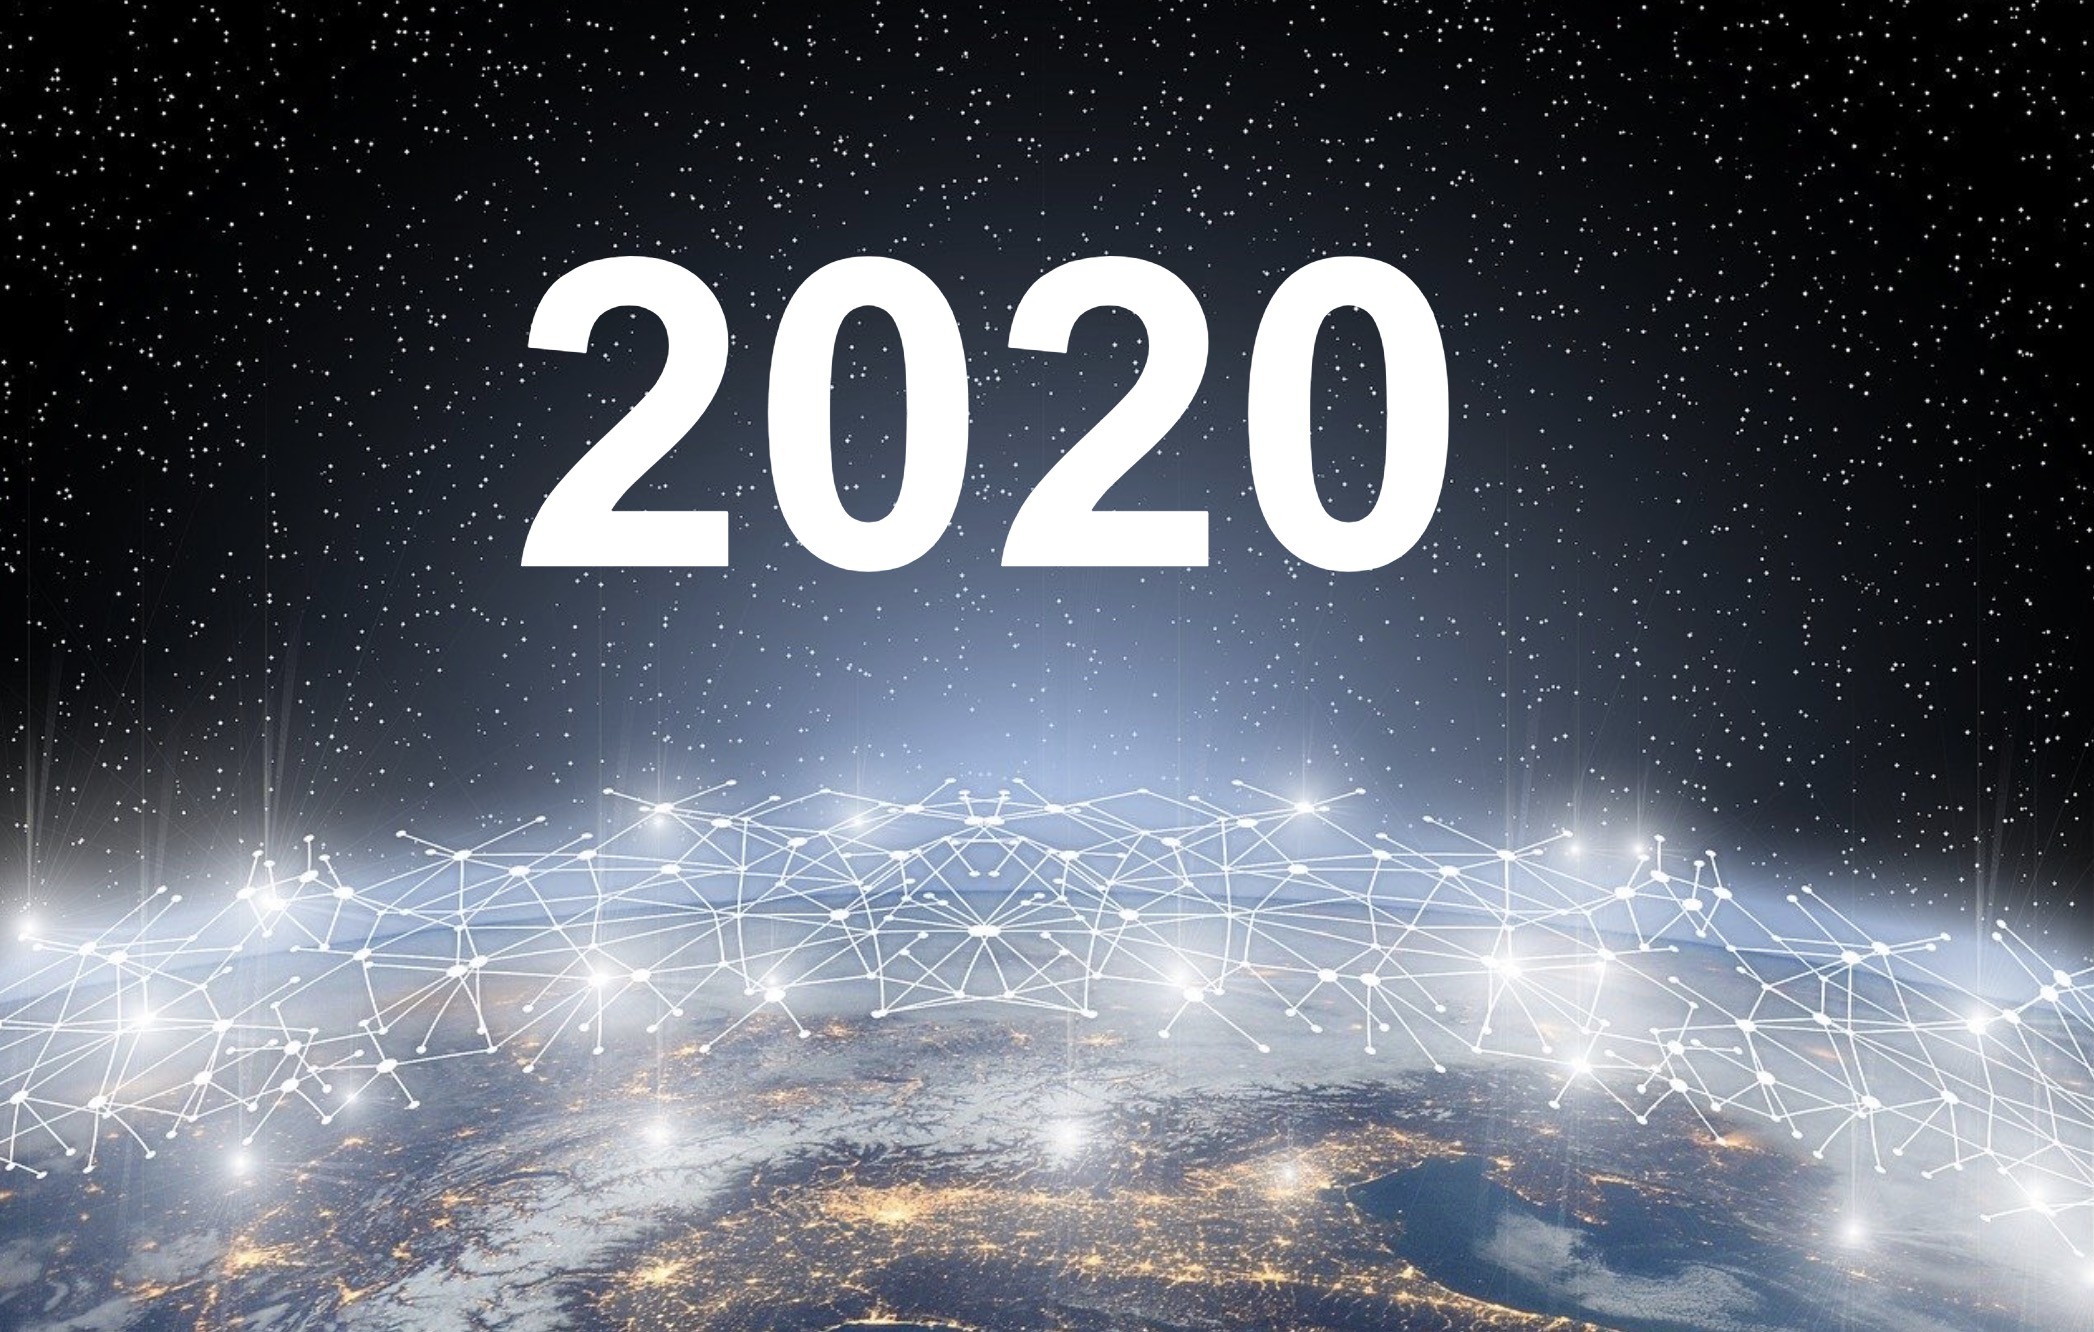 How to stop worrying and embrace digital transformation in 2020